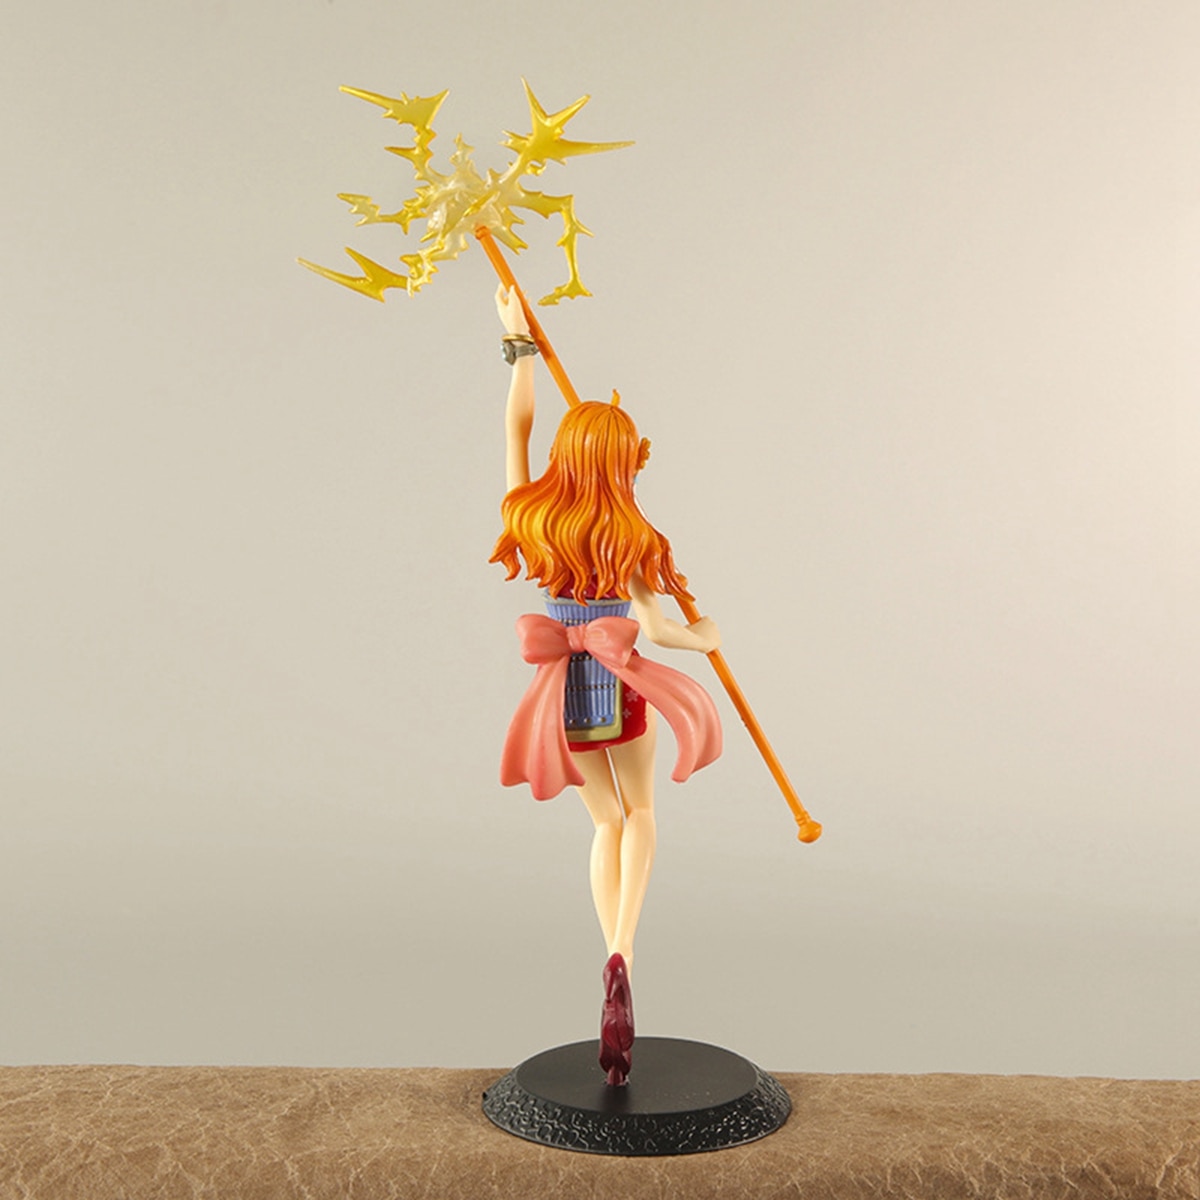 Anime One Piece Nami Figure Diva Stick Model Toy Gift Collection 23CM Luffy Action Figure Collection 4 - One Piece Store